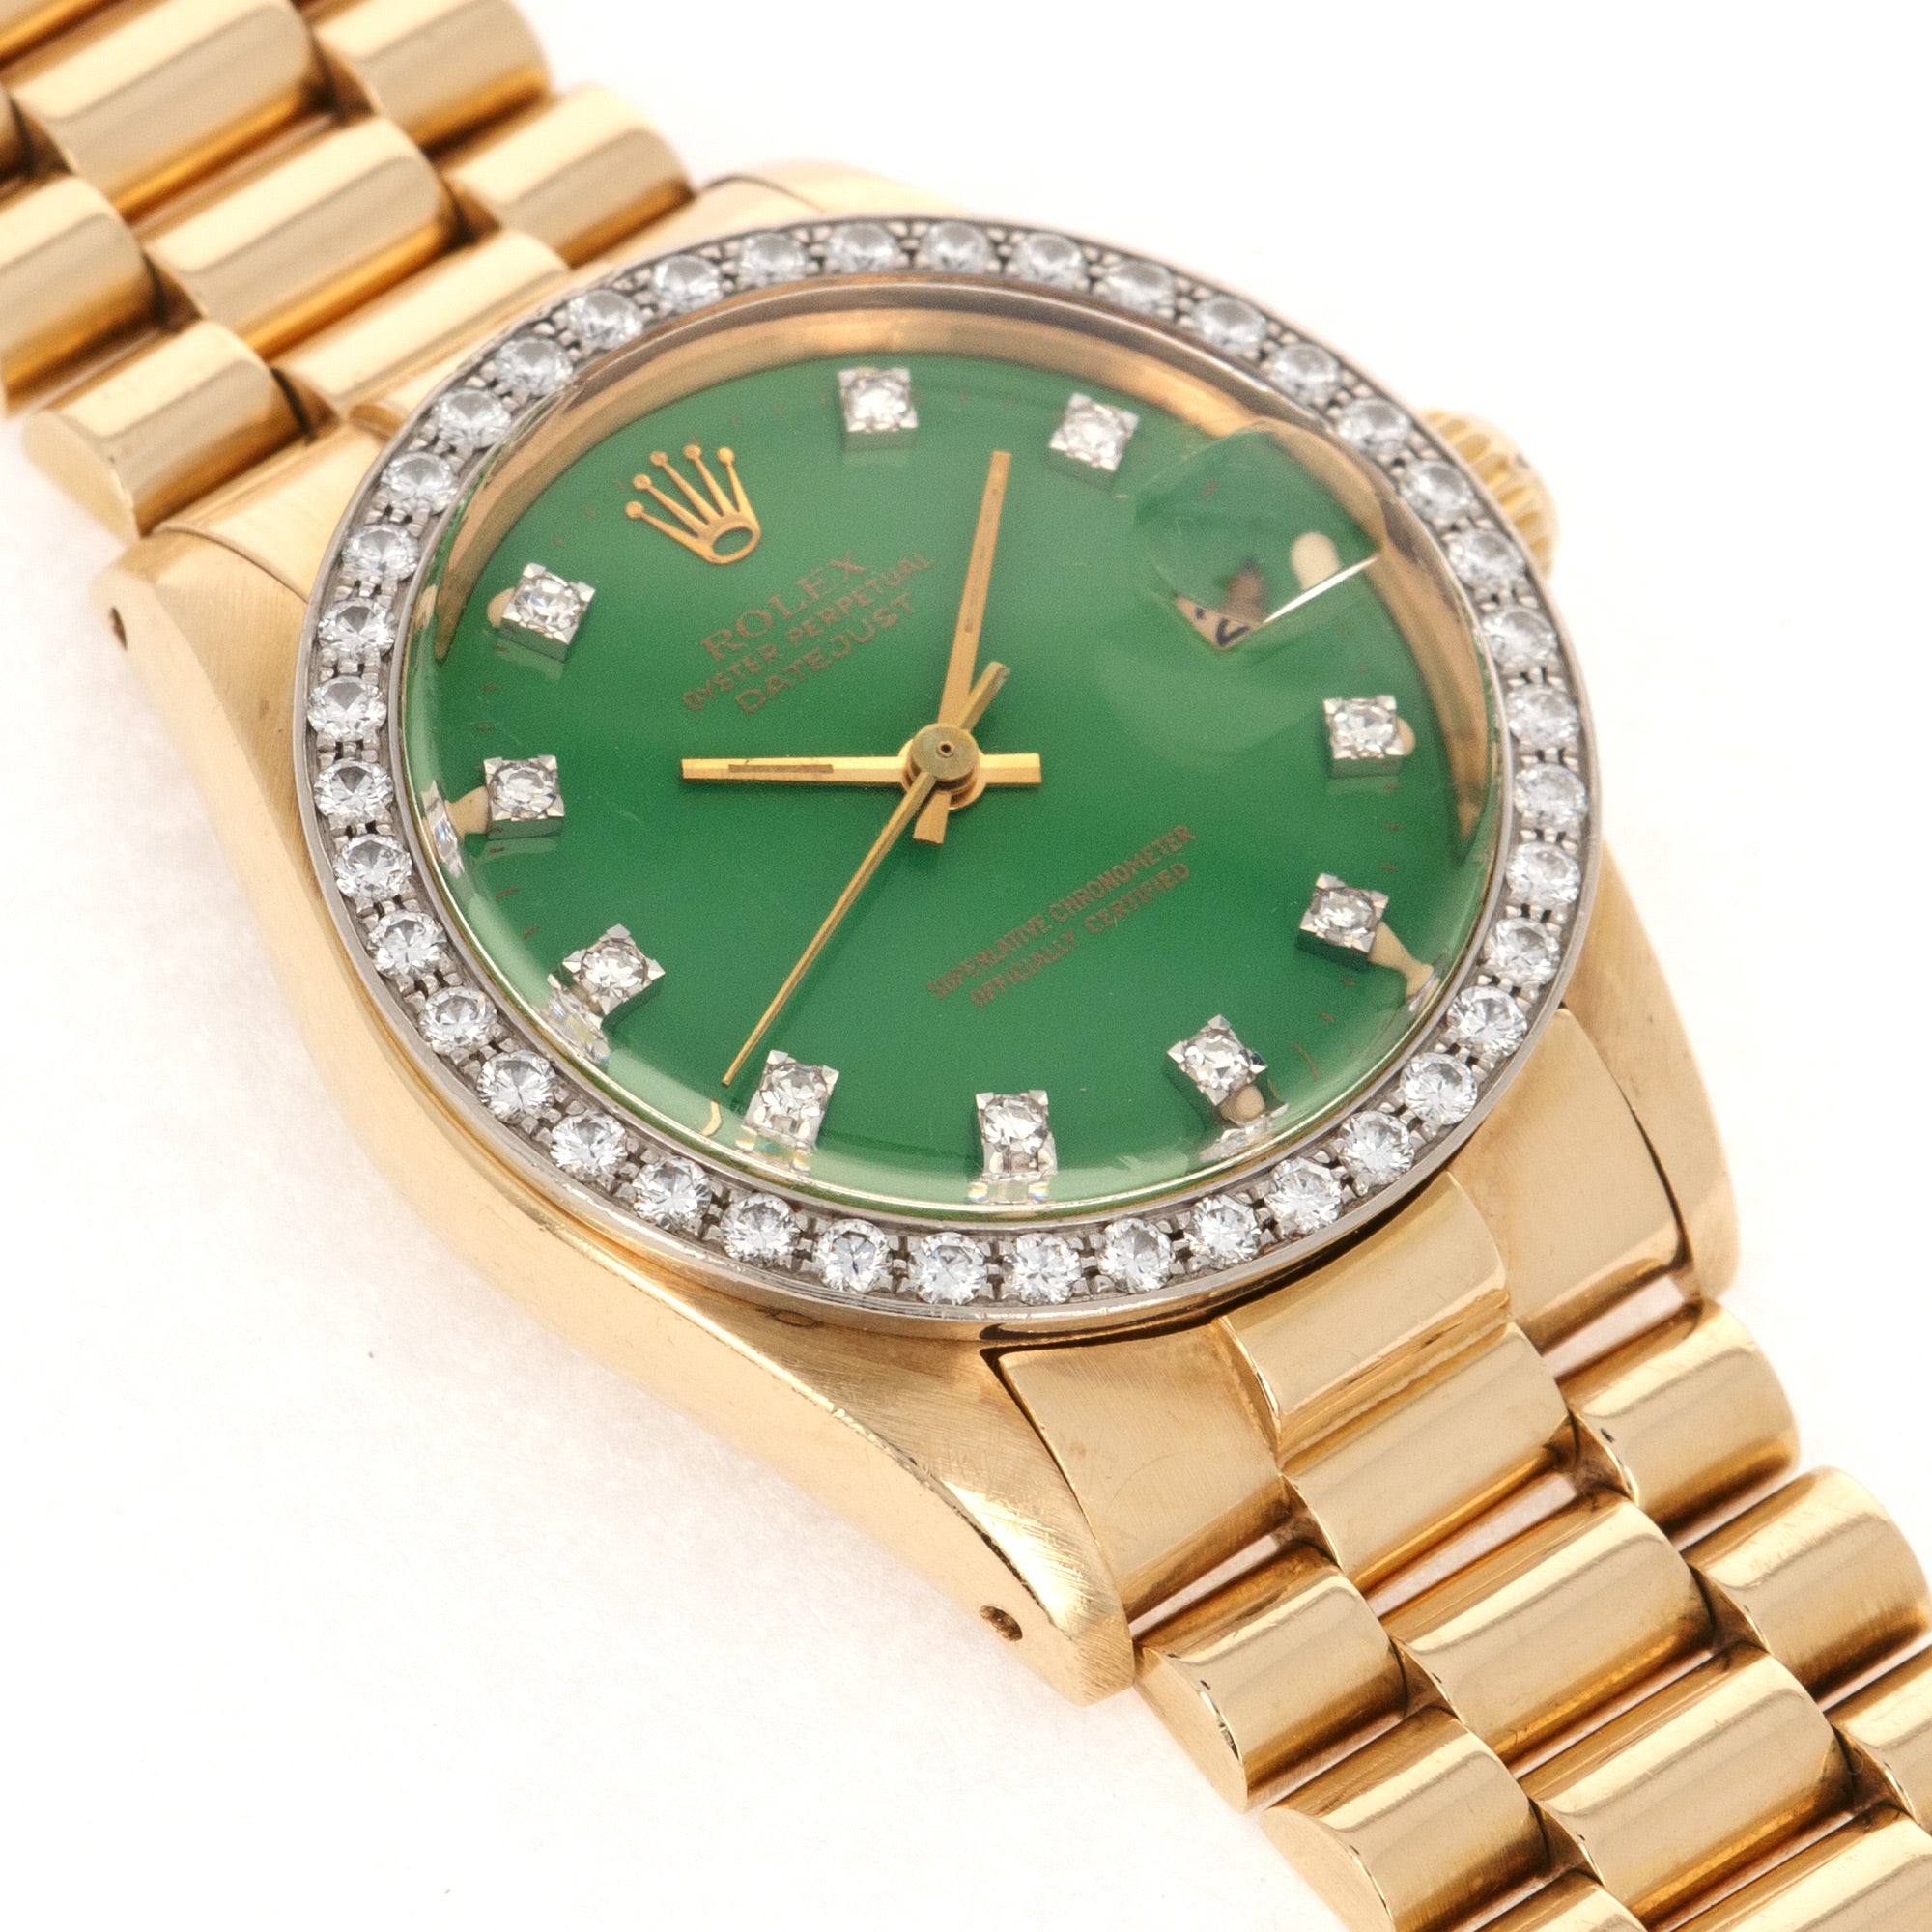 Rolex - Rolex Midsize Datejust Ref. 6828 with Green Stella Dial - The Keystone Watches